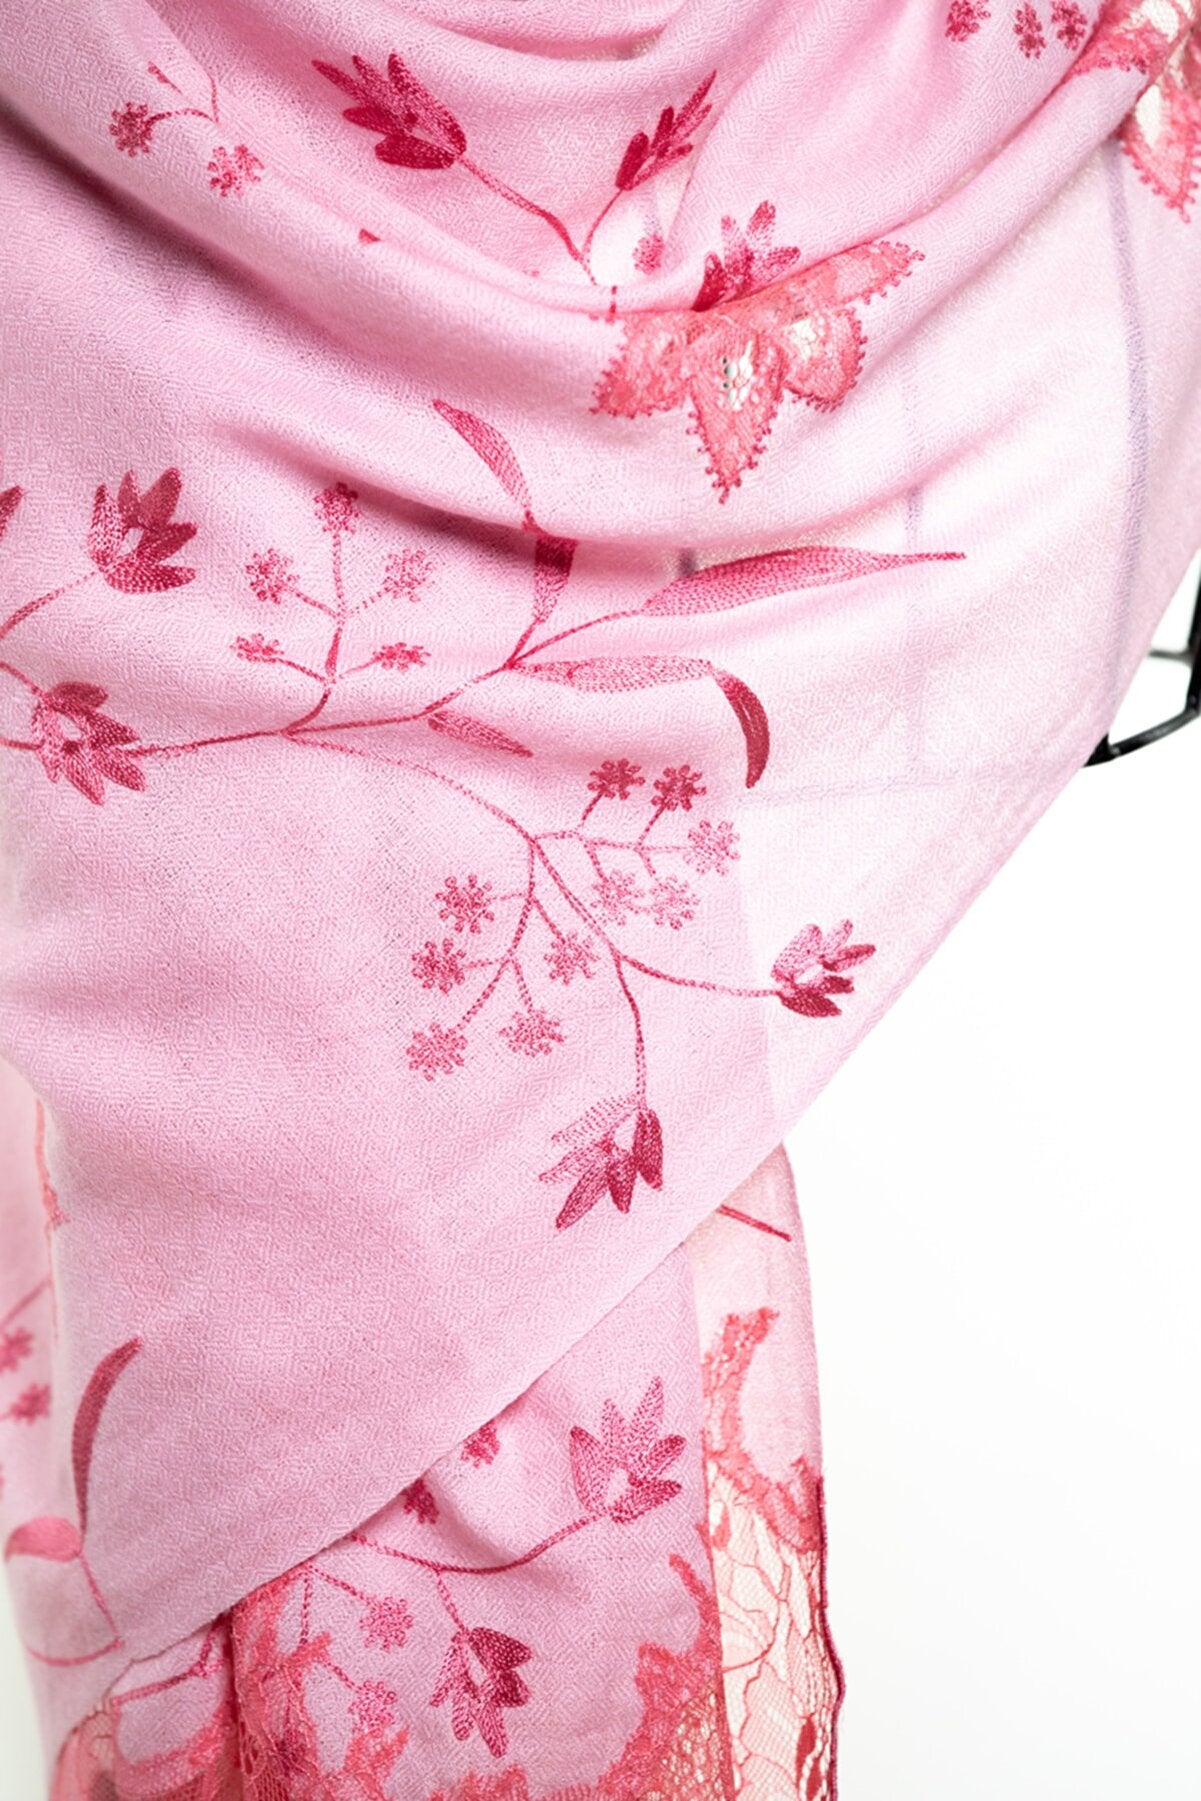 Border Lace & Embroidery Floral Sheer Shawl - Pink Flamingo